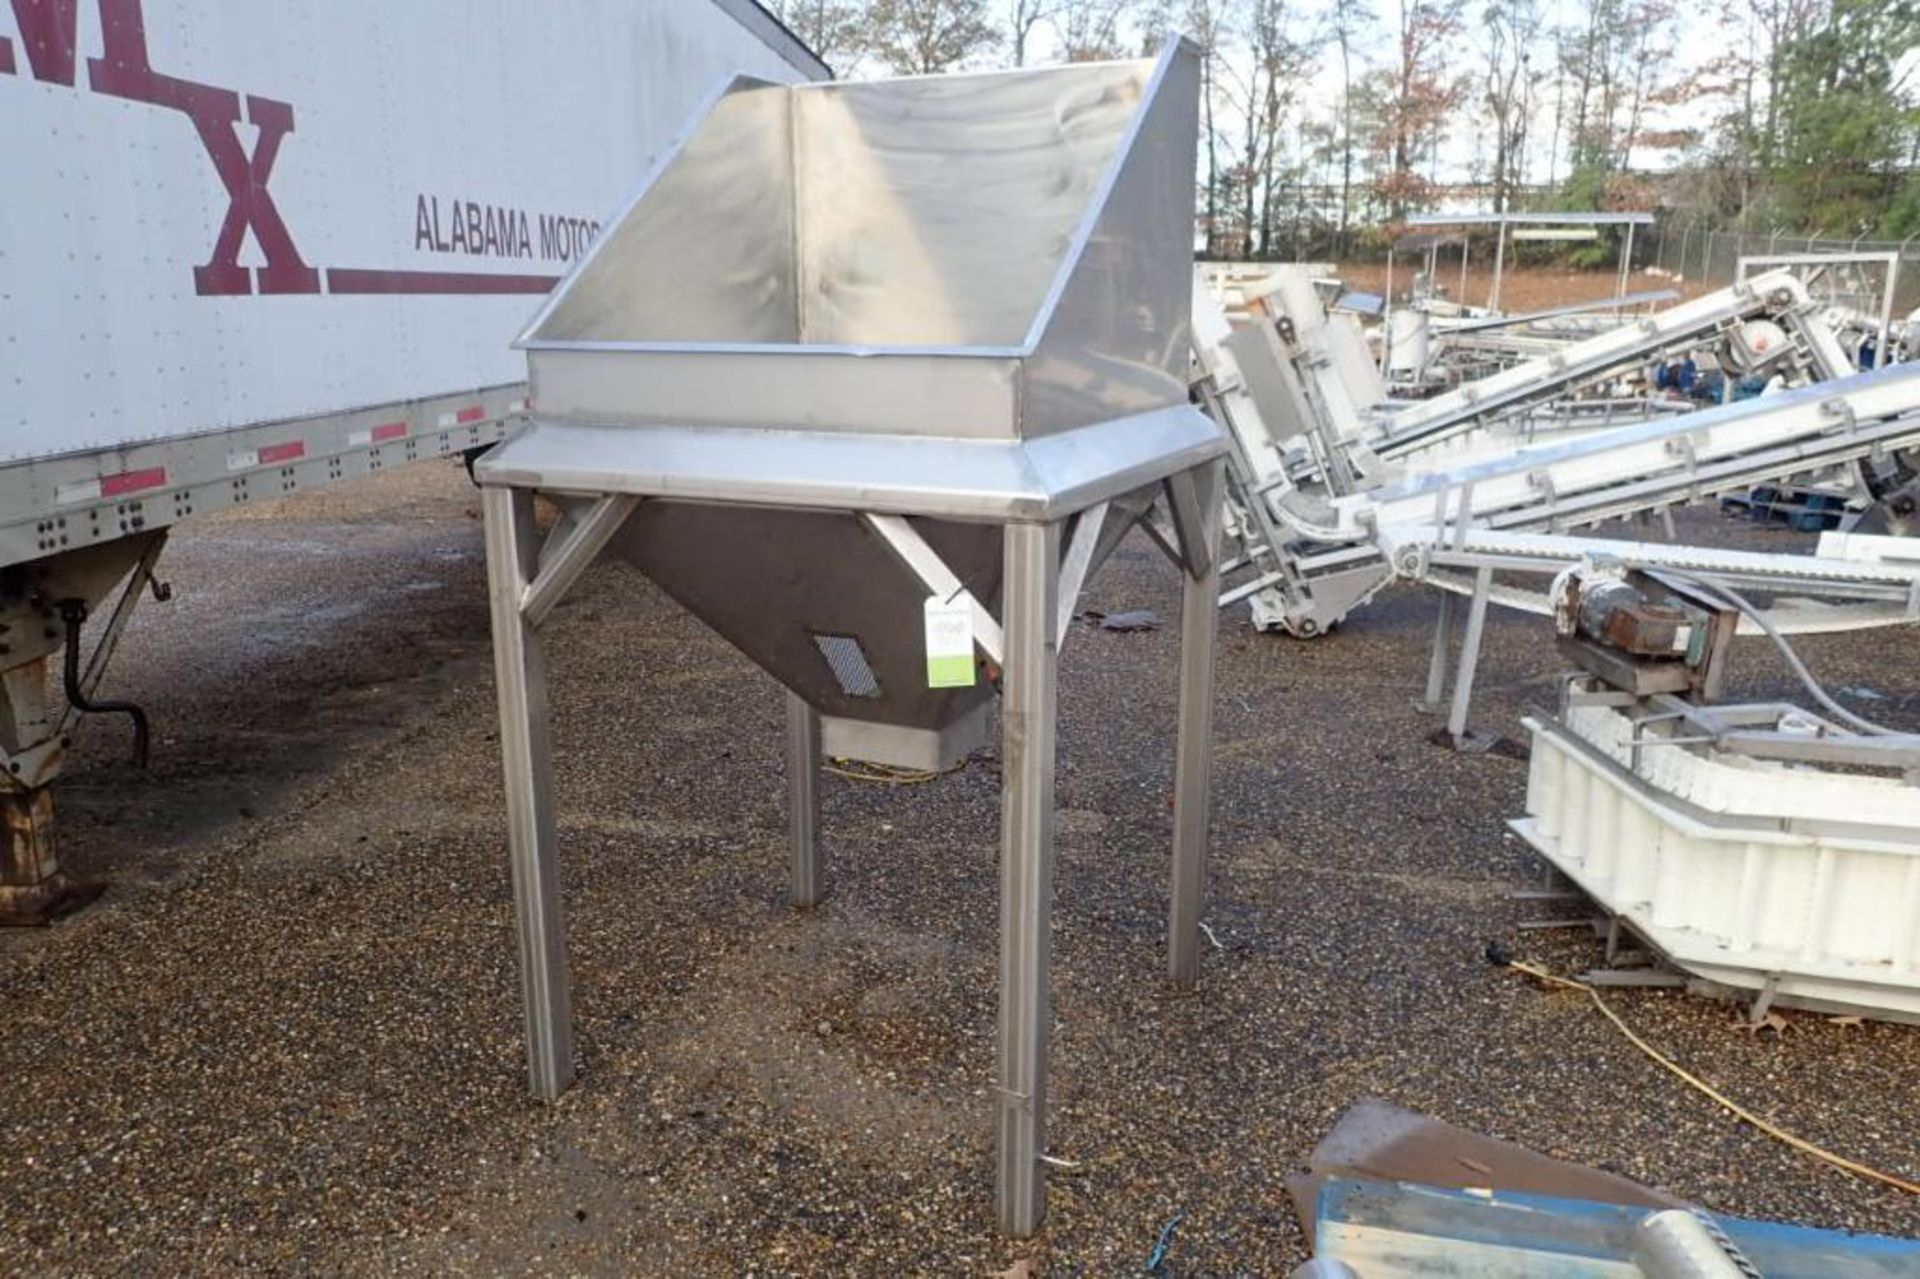 SS hopper, 42 in. x 42 in. x 60 in. tall, discharge 11.5 in. x 11.5 in. - ** Located in Dothan, Alab